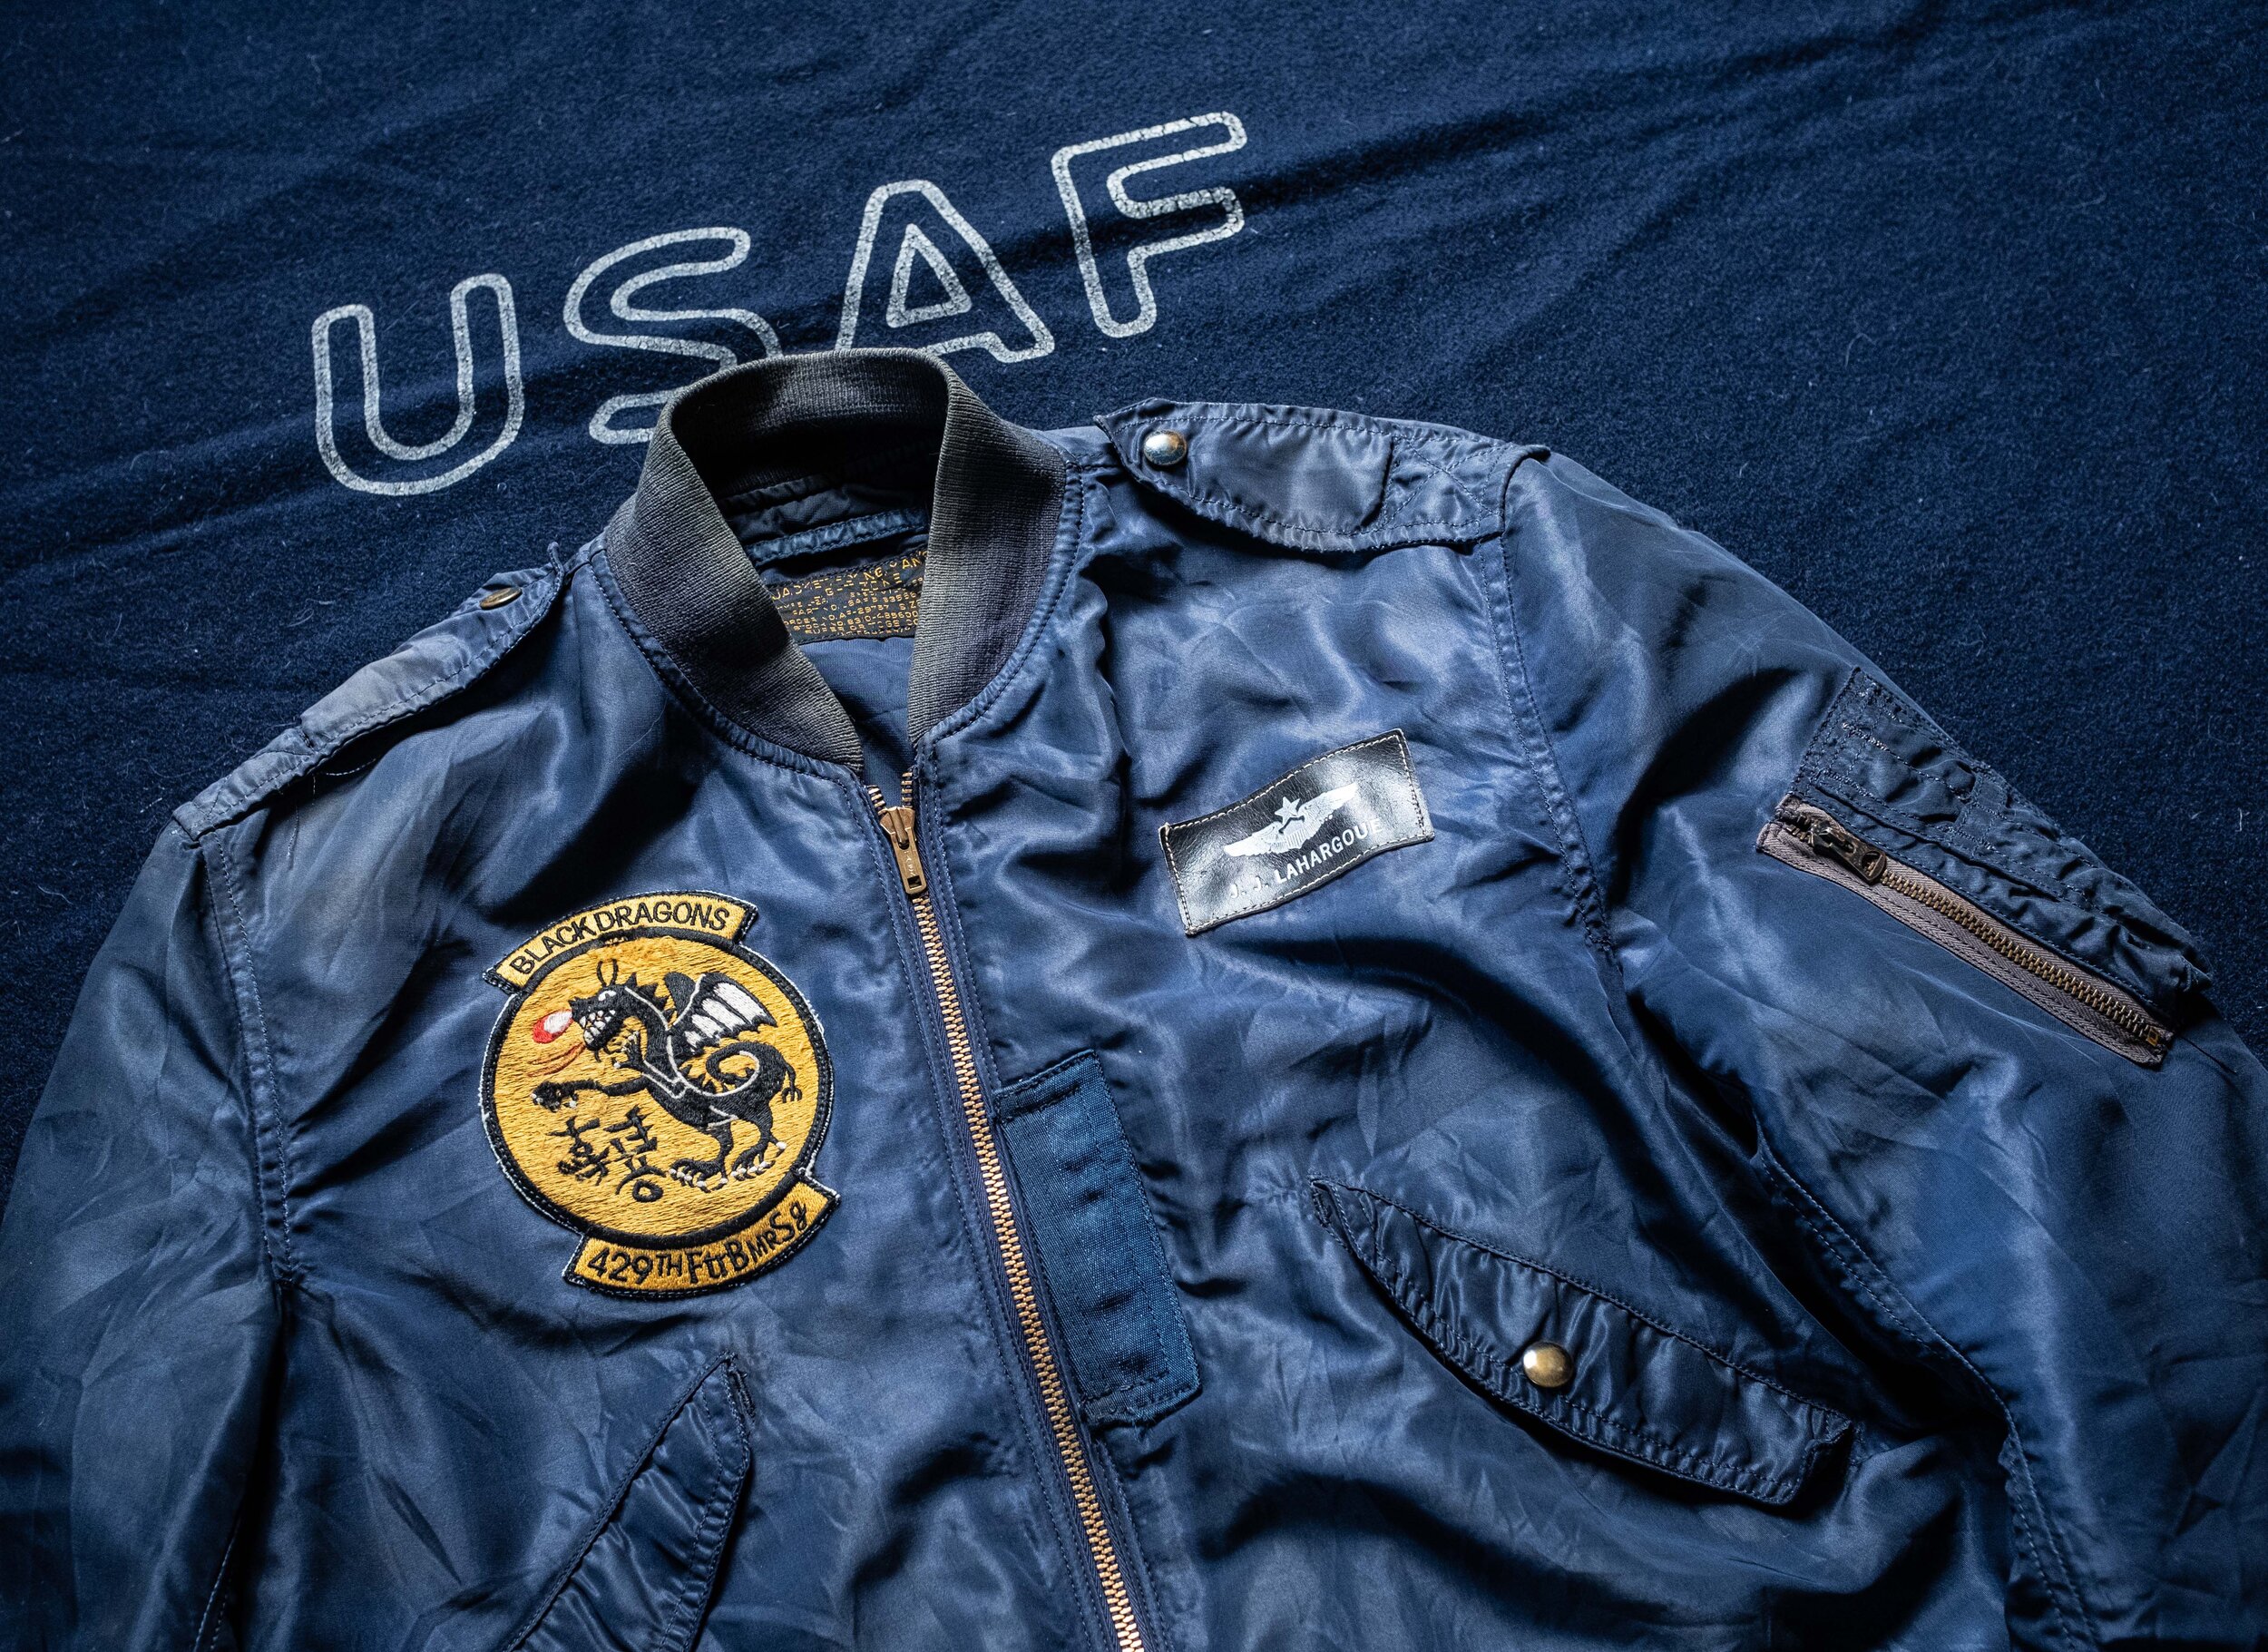 1950's Korean War USAF L-2a US Air Force Blue Nylon Flight Jacket w/ 429th  Fighter Bomber Squadron patches. Size 40. — SAUNDERSMILITARIA